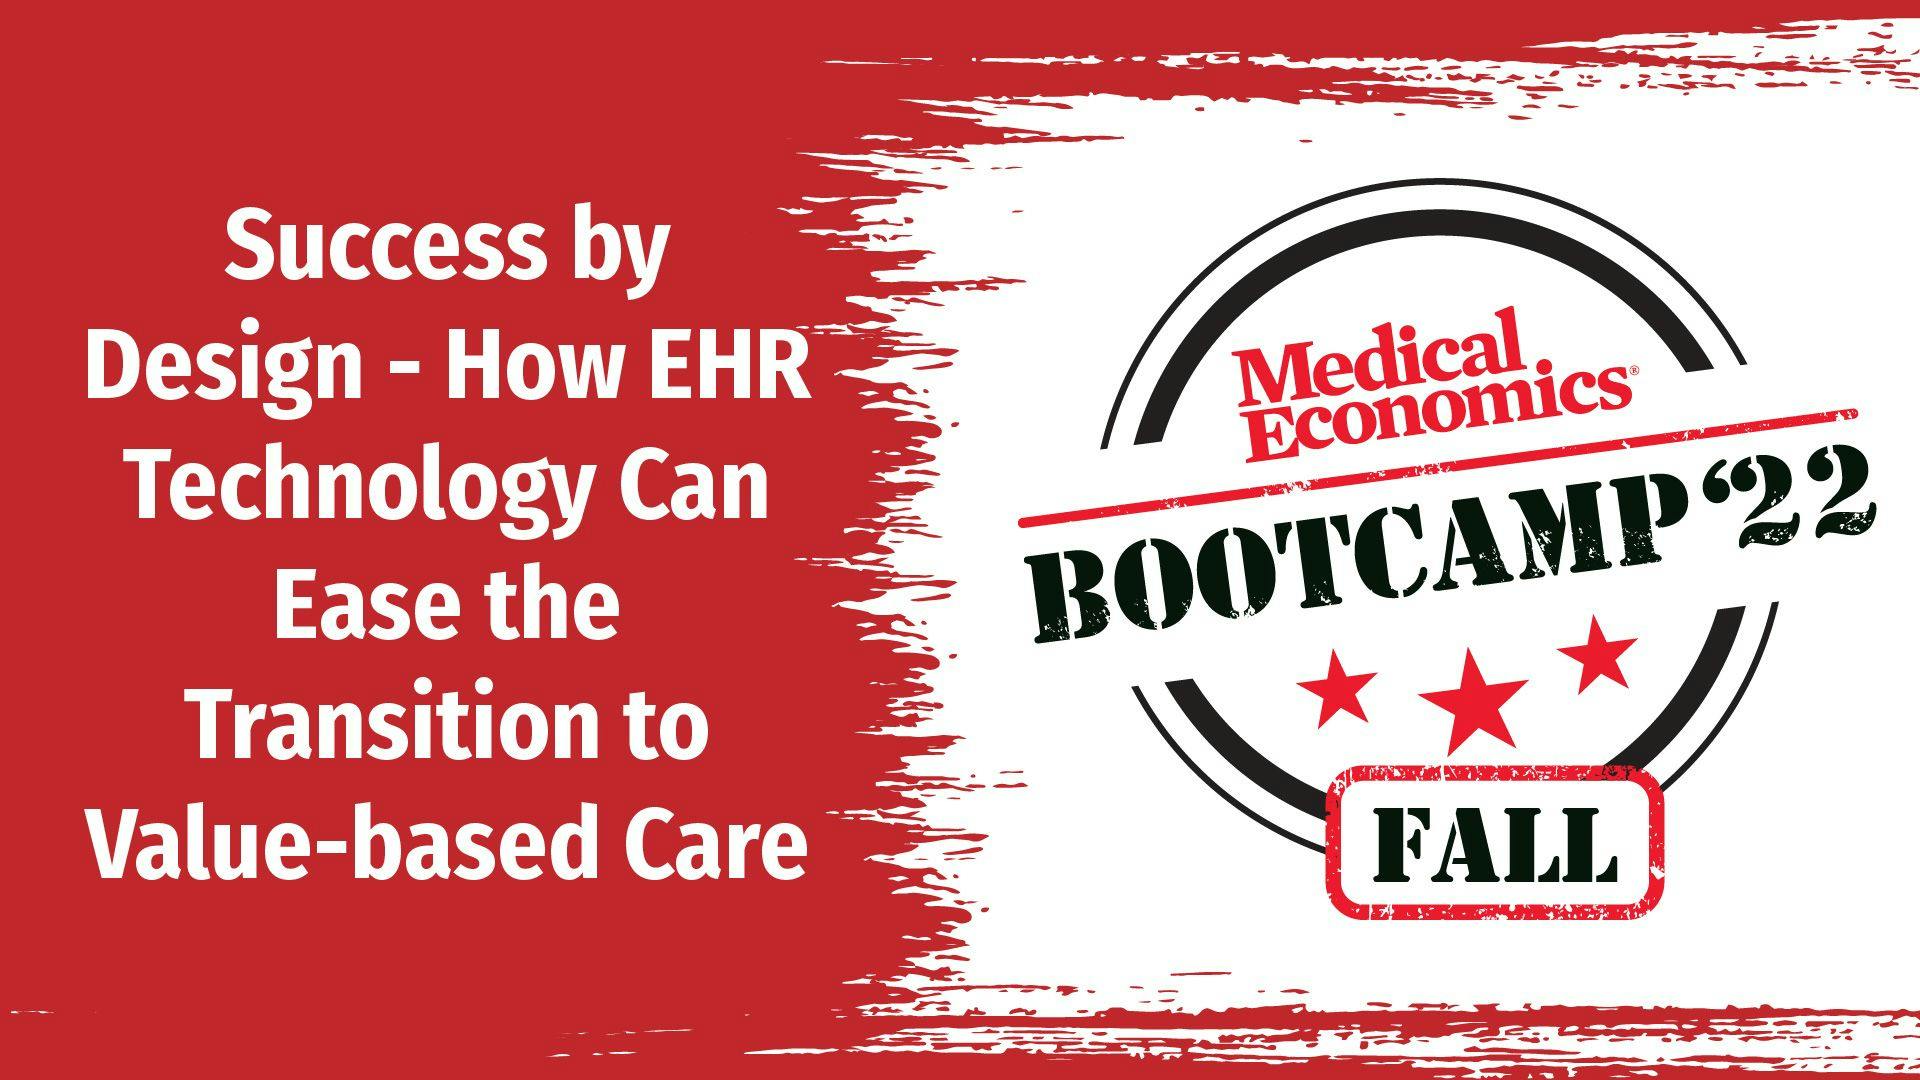 Bootcamp Fall 2022: How EHR technology can ease the transition to value-based care